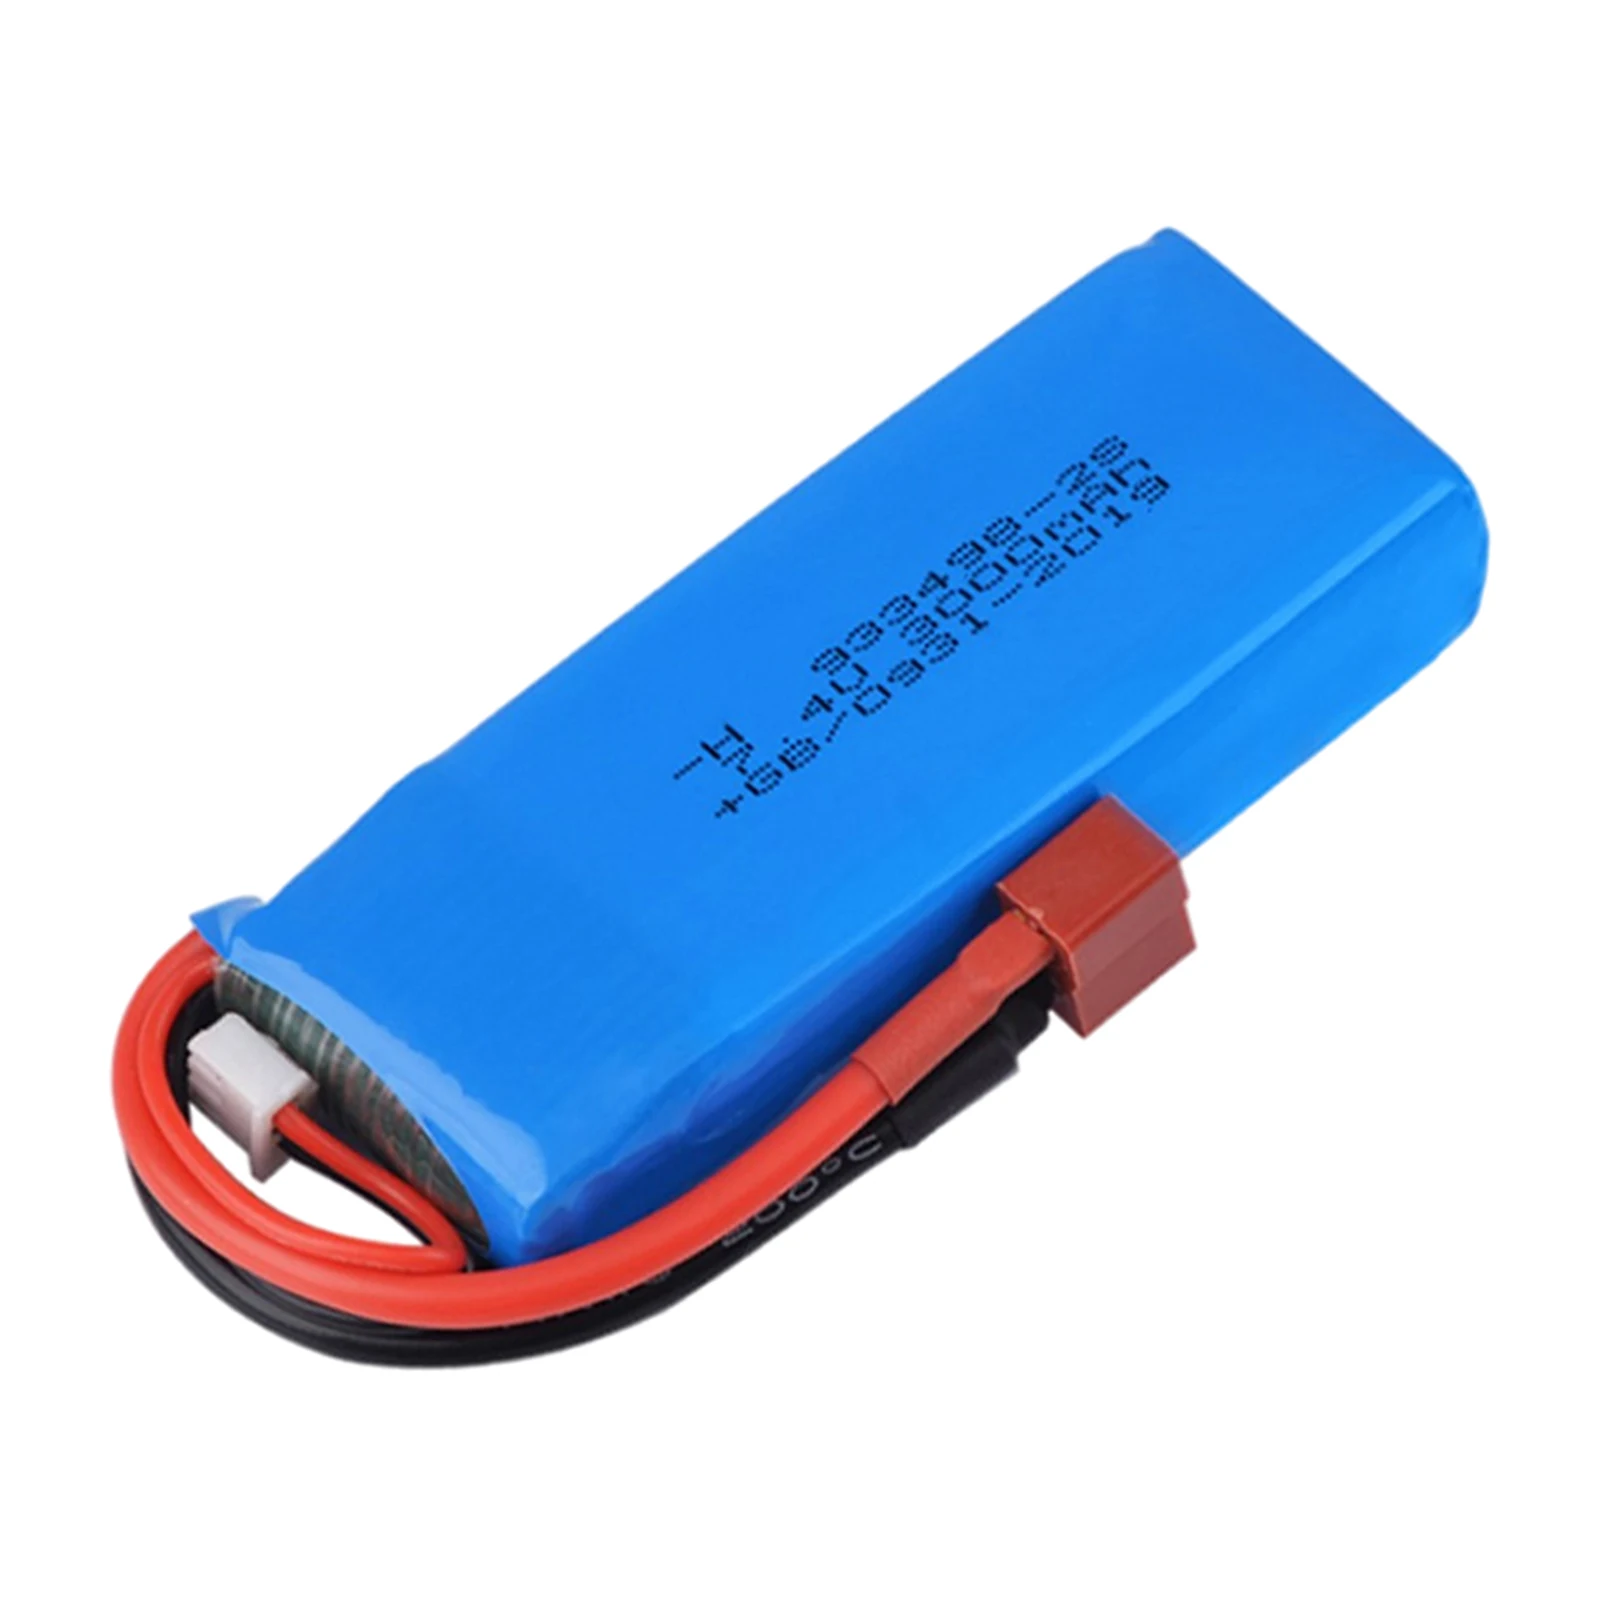 2S 7.4V 3000mAh Lithium Polymer Batteries for WLTOYS XKS 144001 1240181 124019 Remote Control RC Model Car Accessories